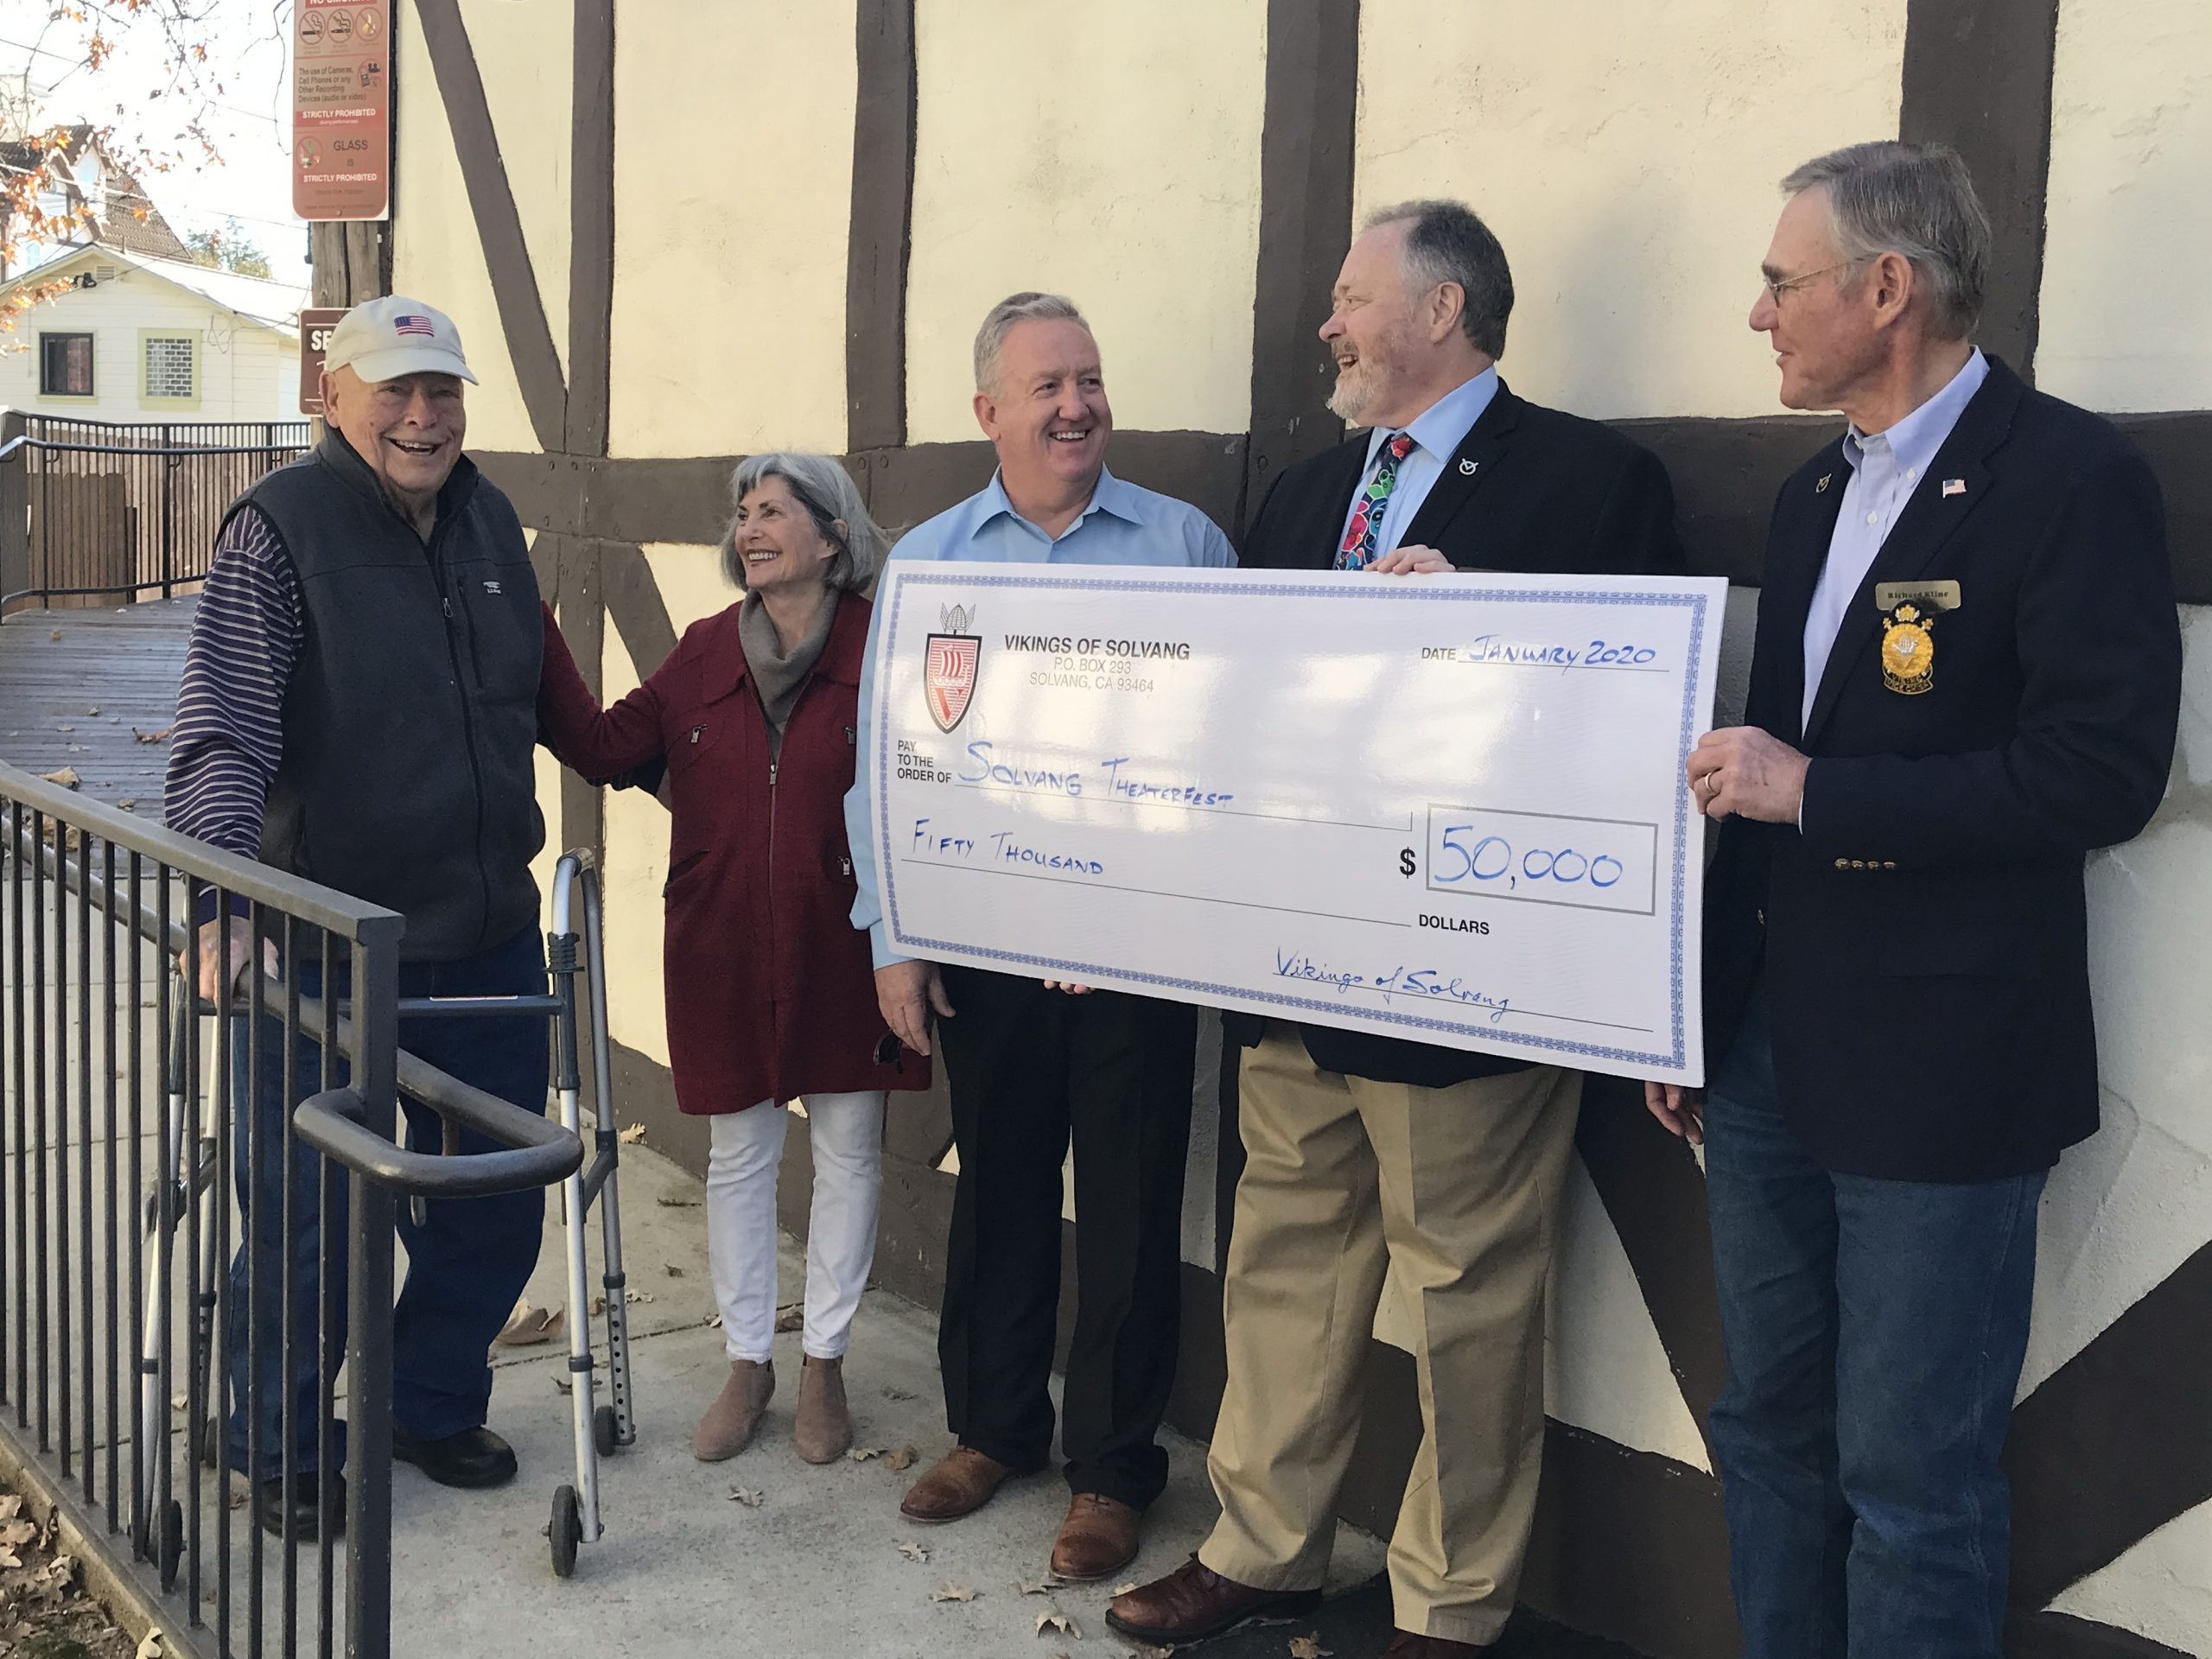 Theaterfest receives $50,000 donation from Vikings of Solvang